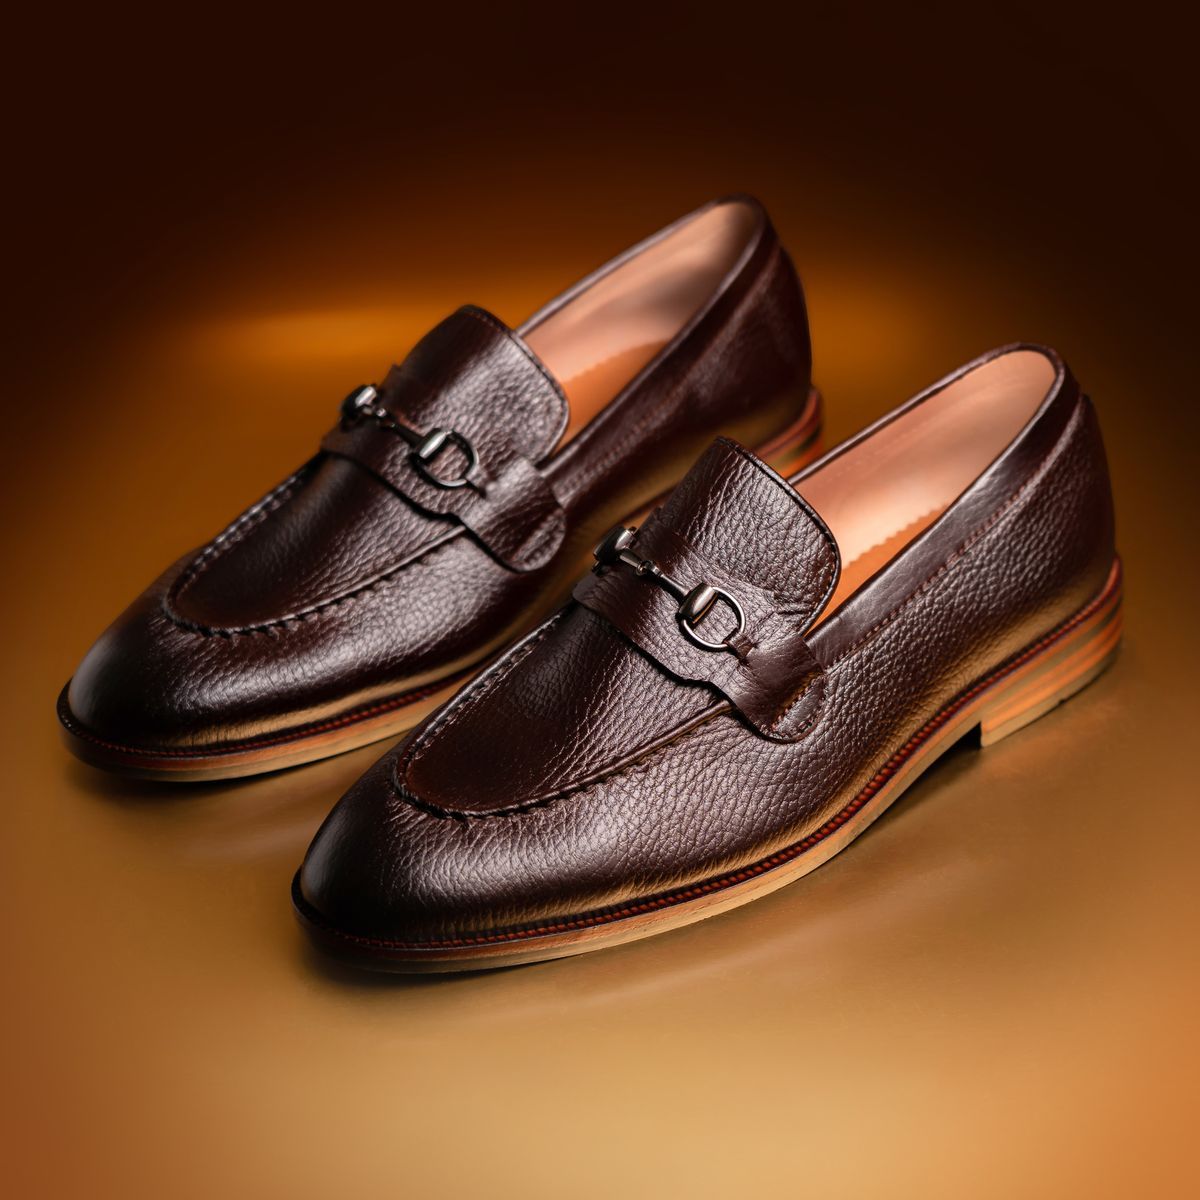 Cocoa Horsebit Loafer in Grained Leather Image